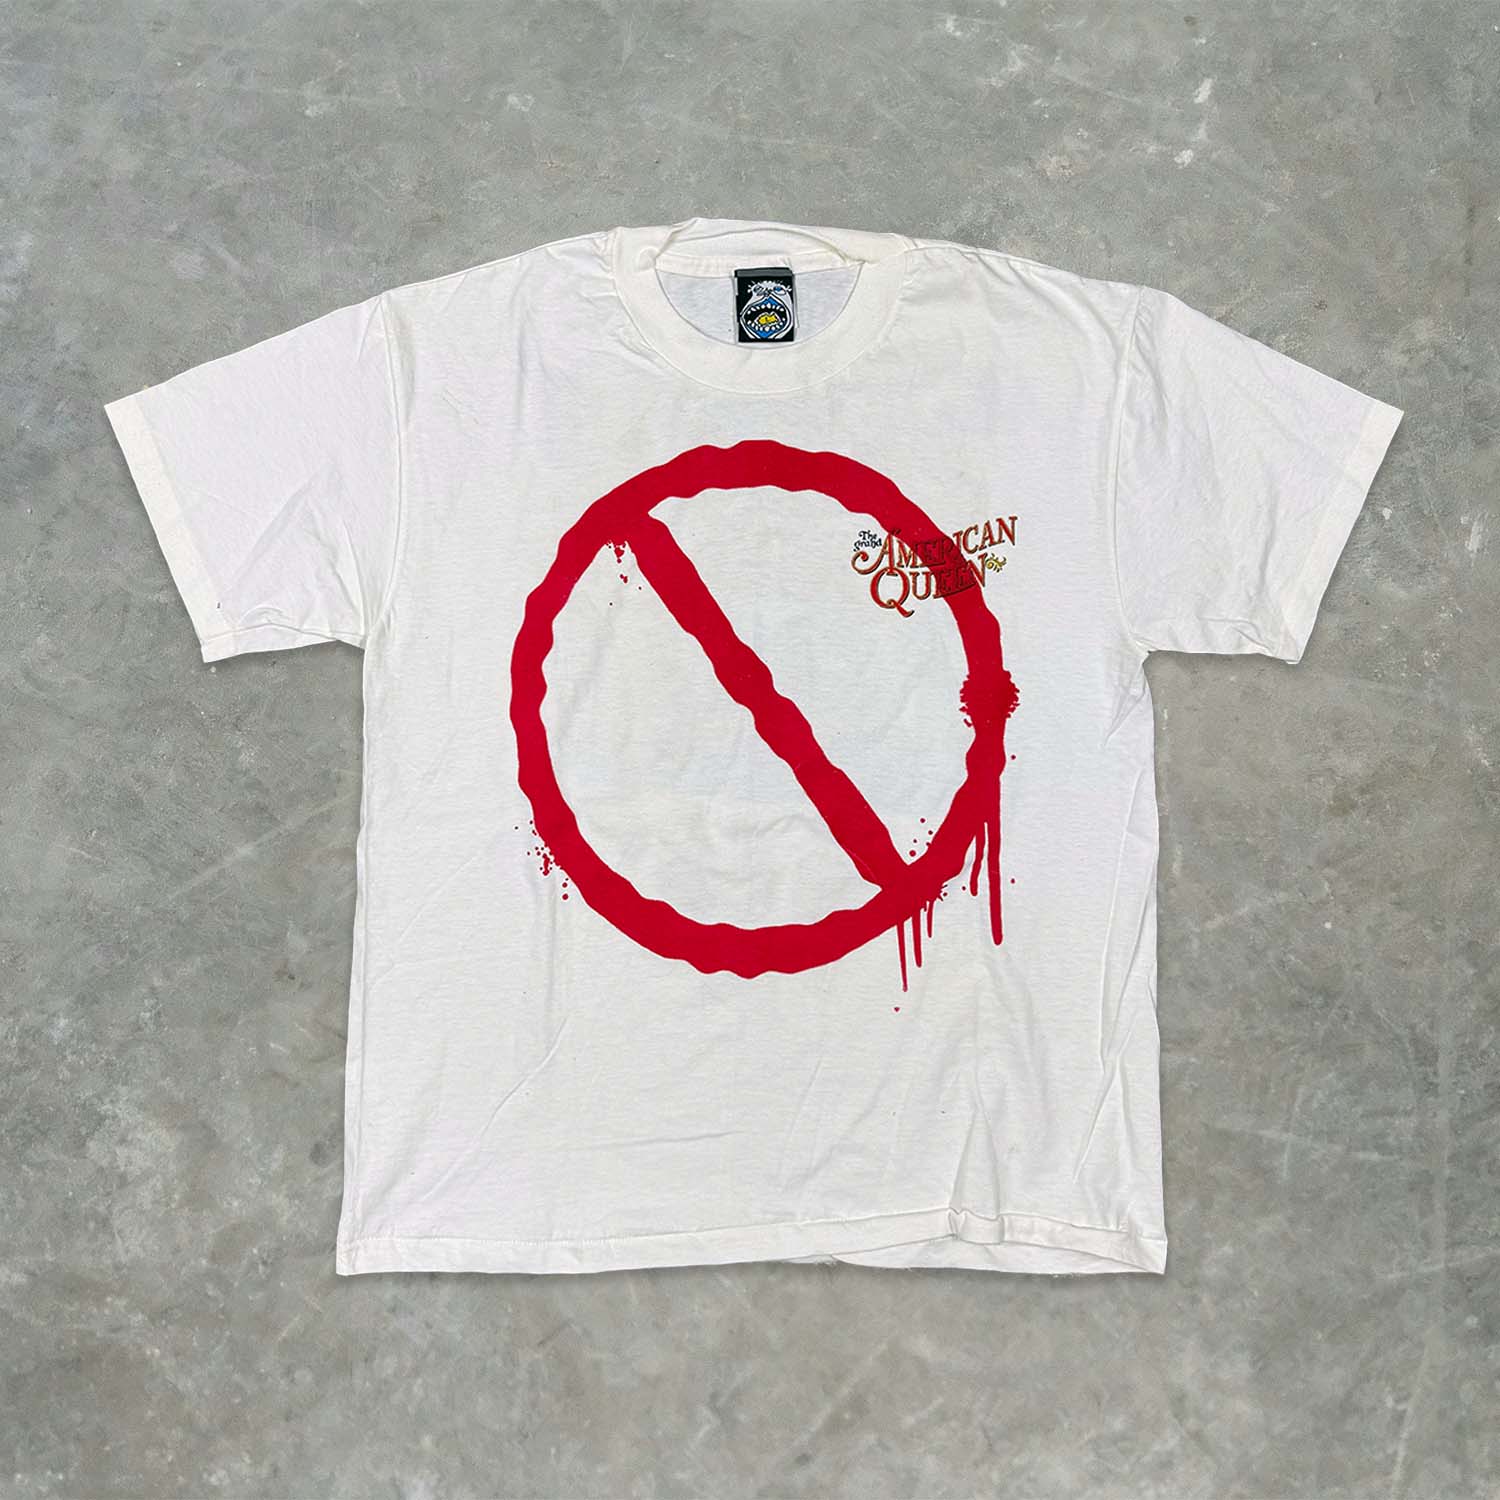 Dont Do Drugs Tee